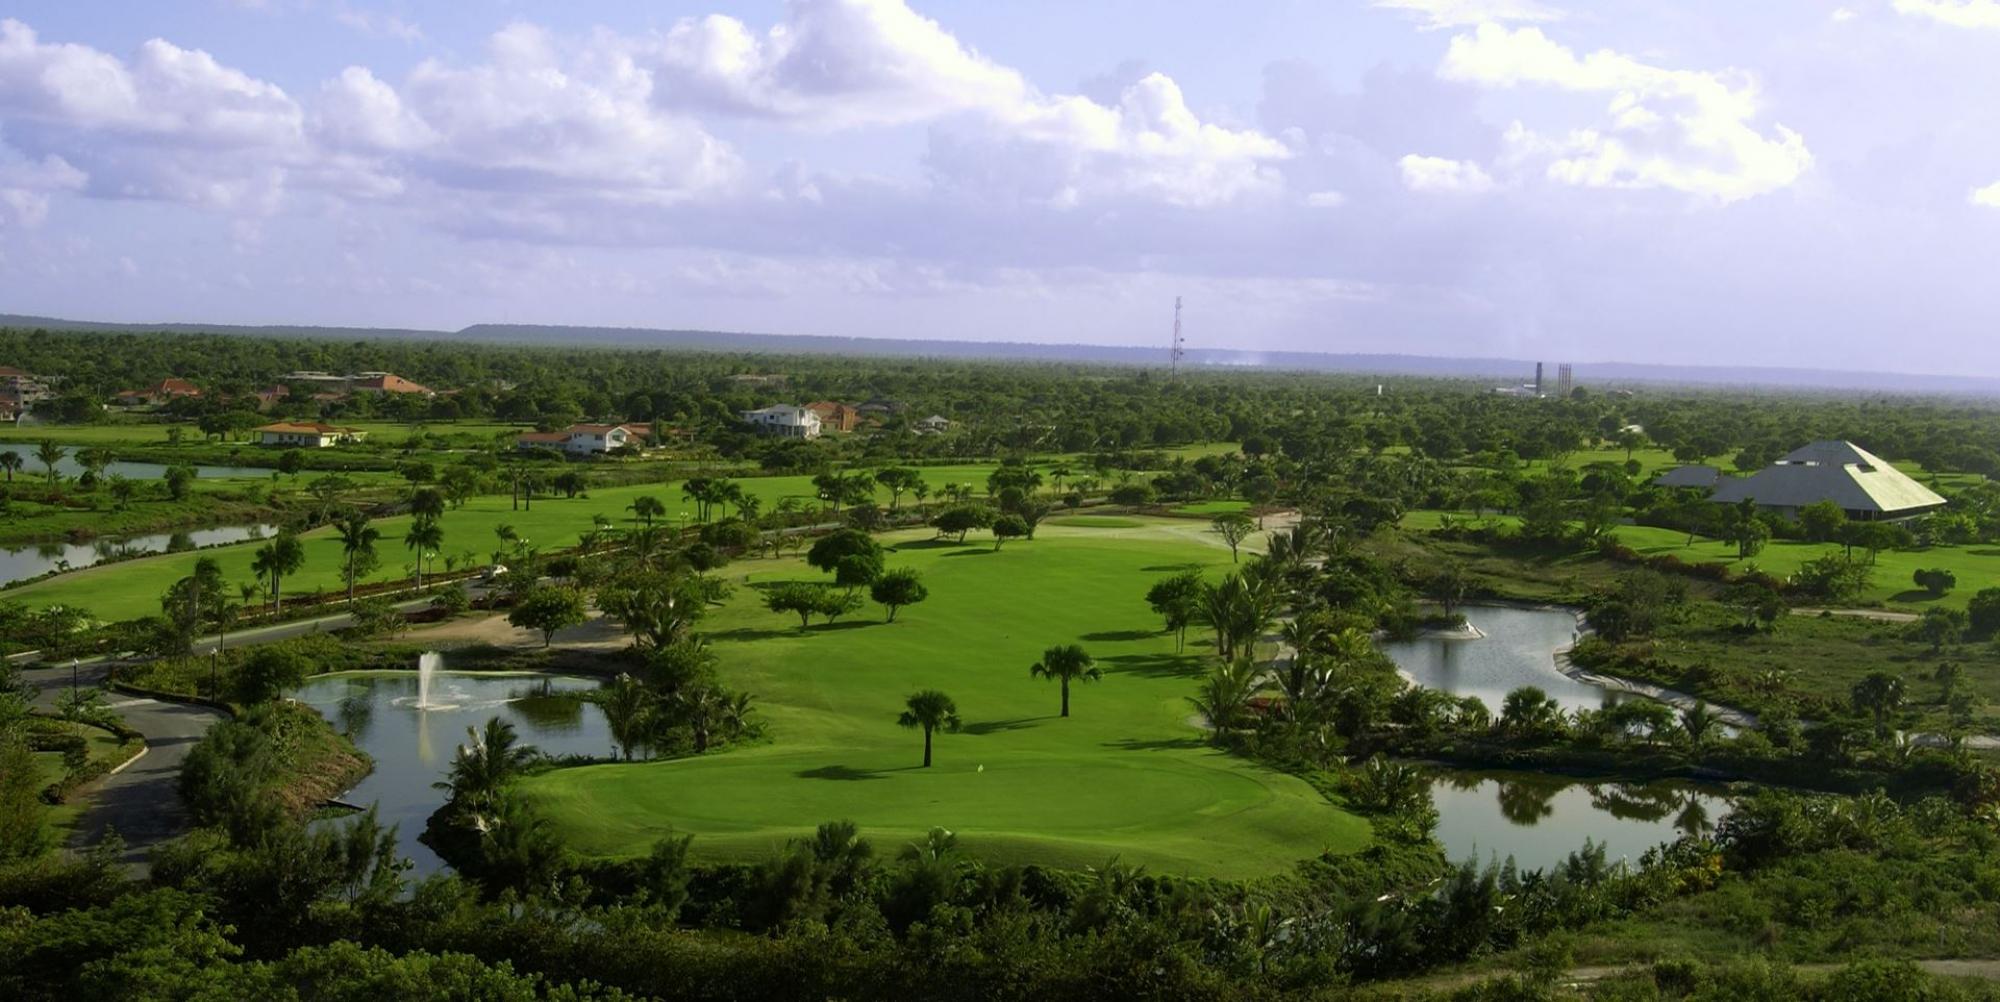 View Cocotal Golf and Country Club's lovely golf course in magnificent Dominican Republic.